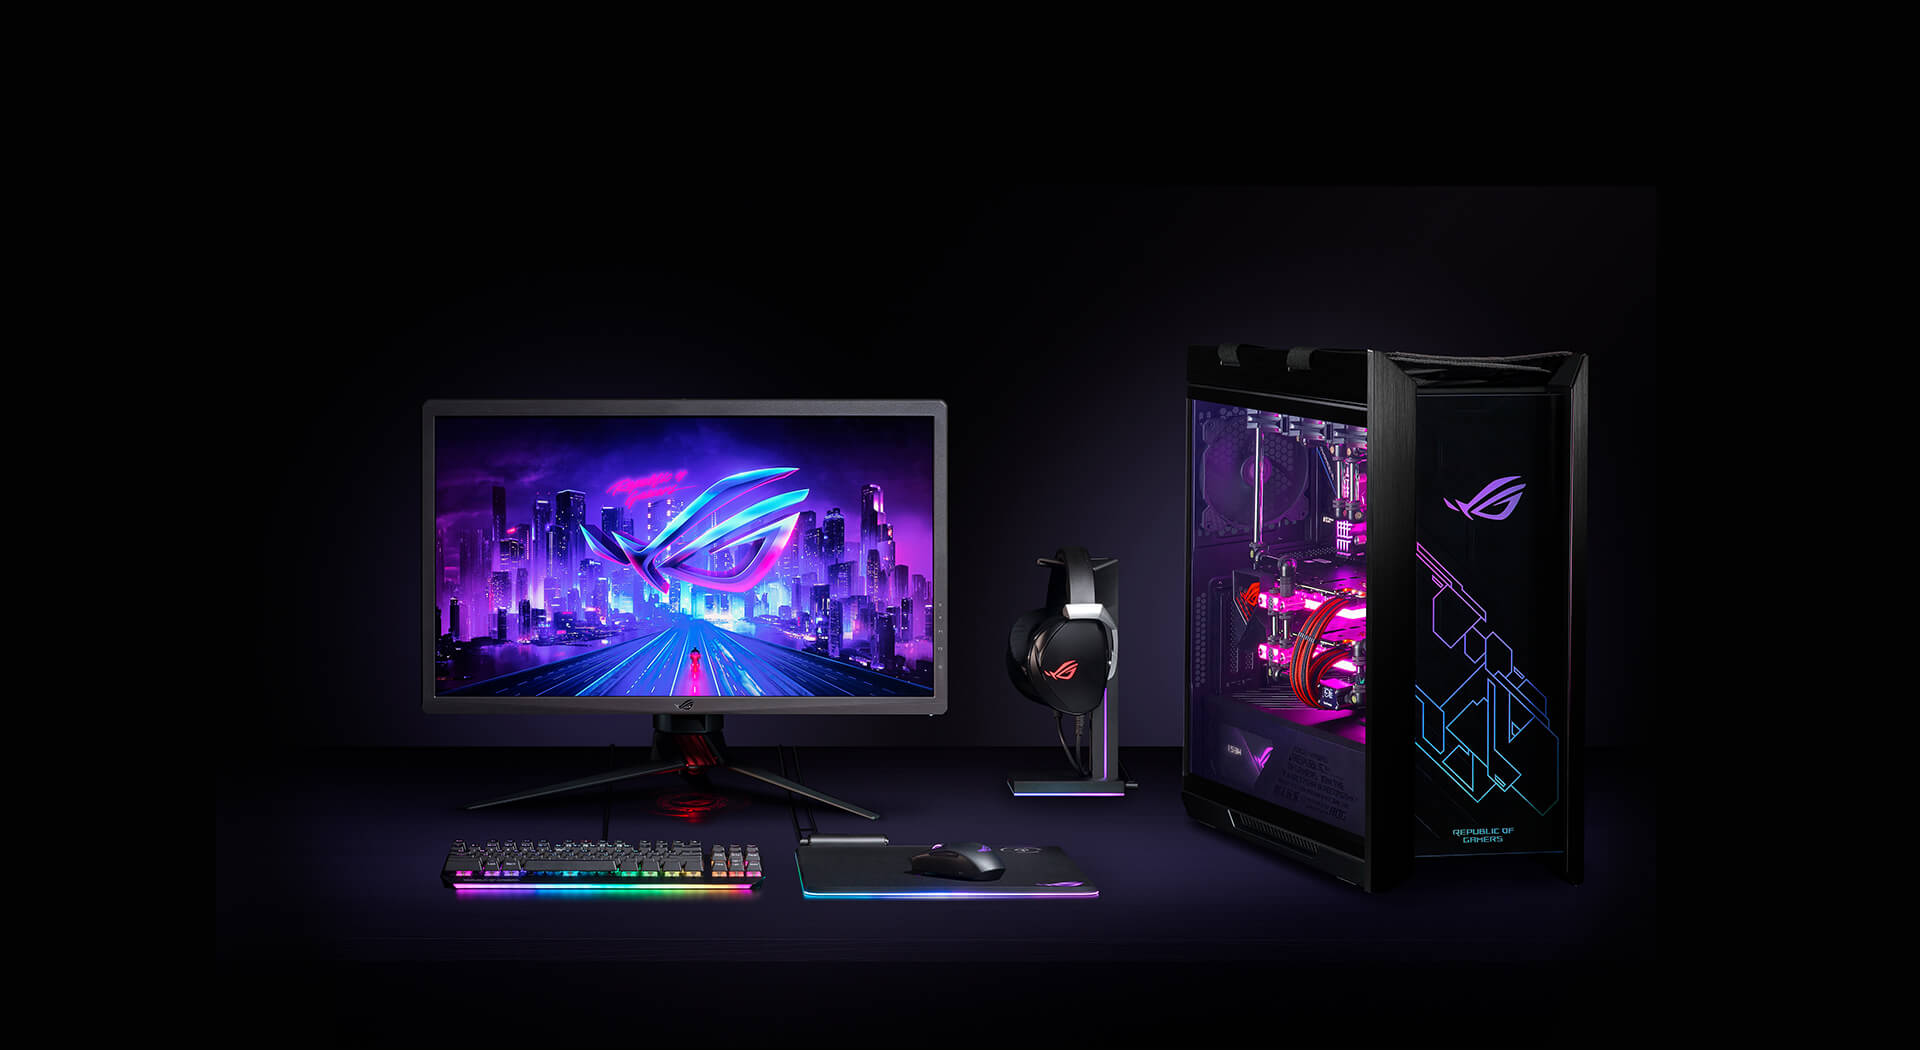 The ROG product series lineup